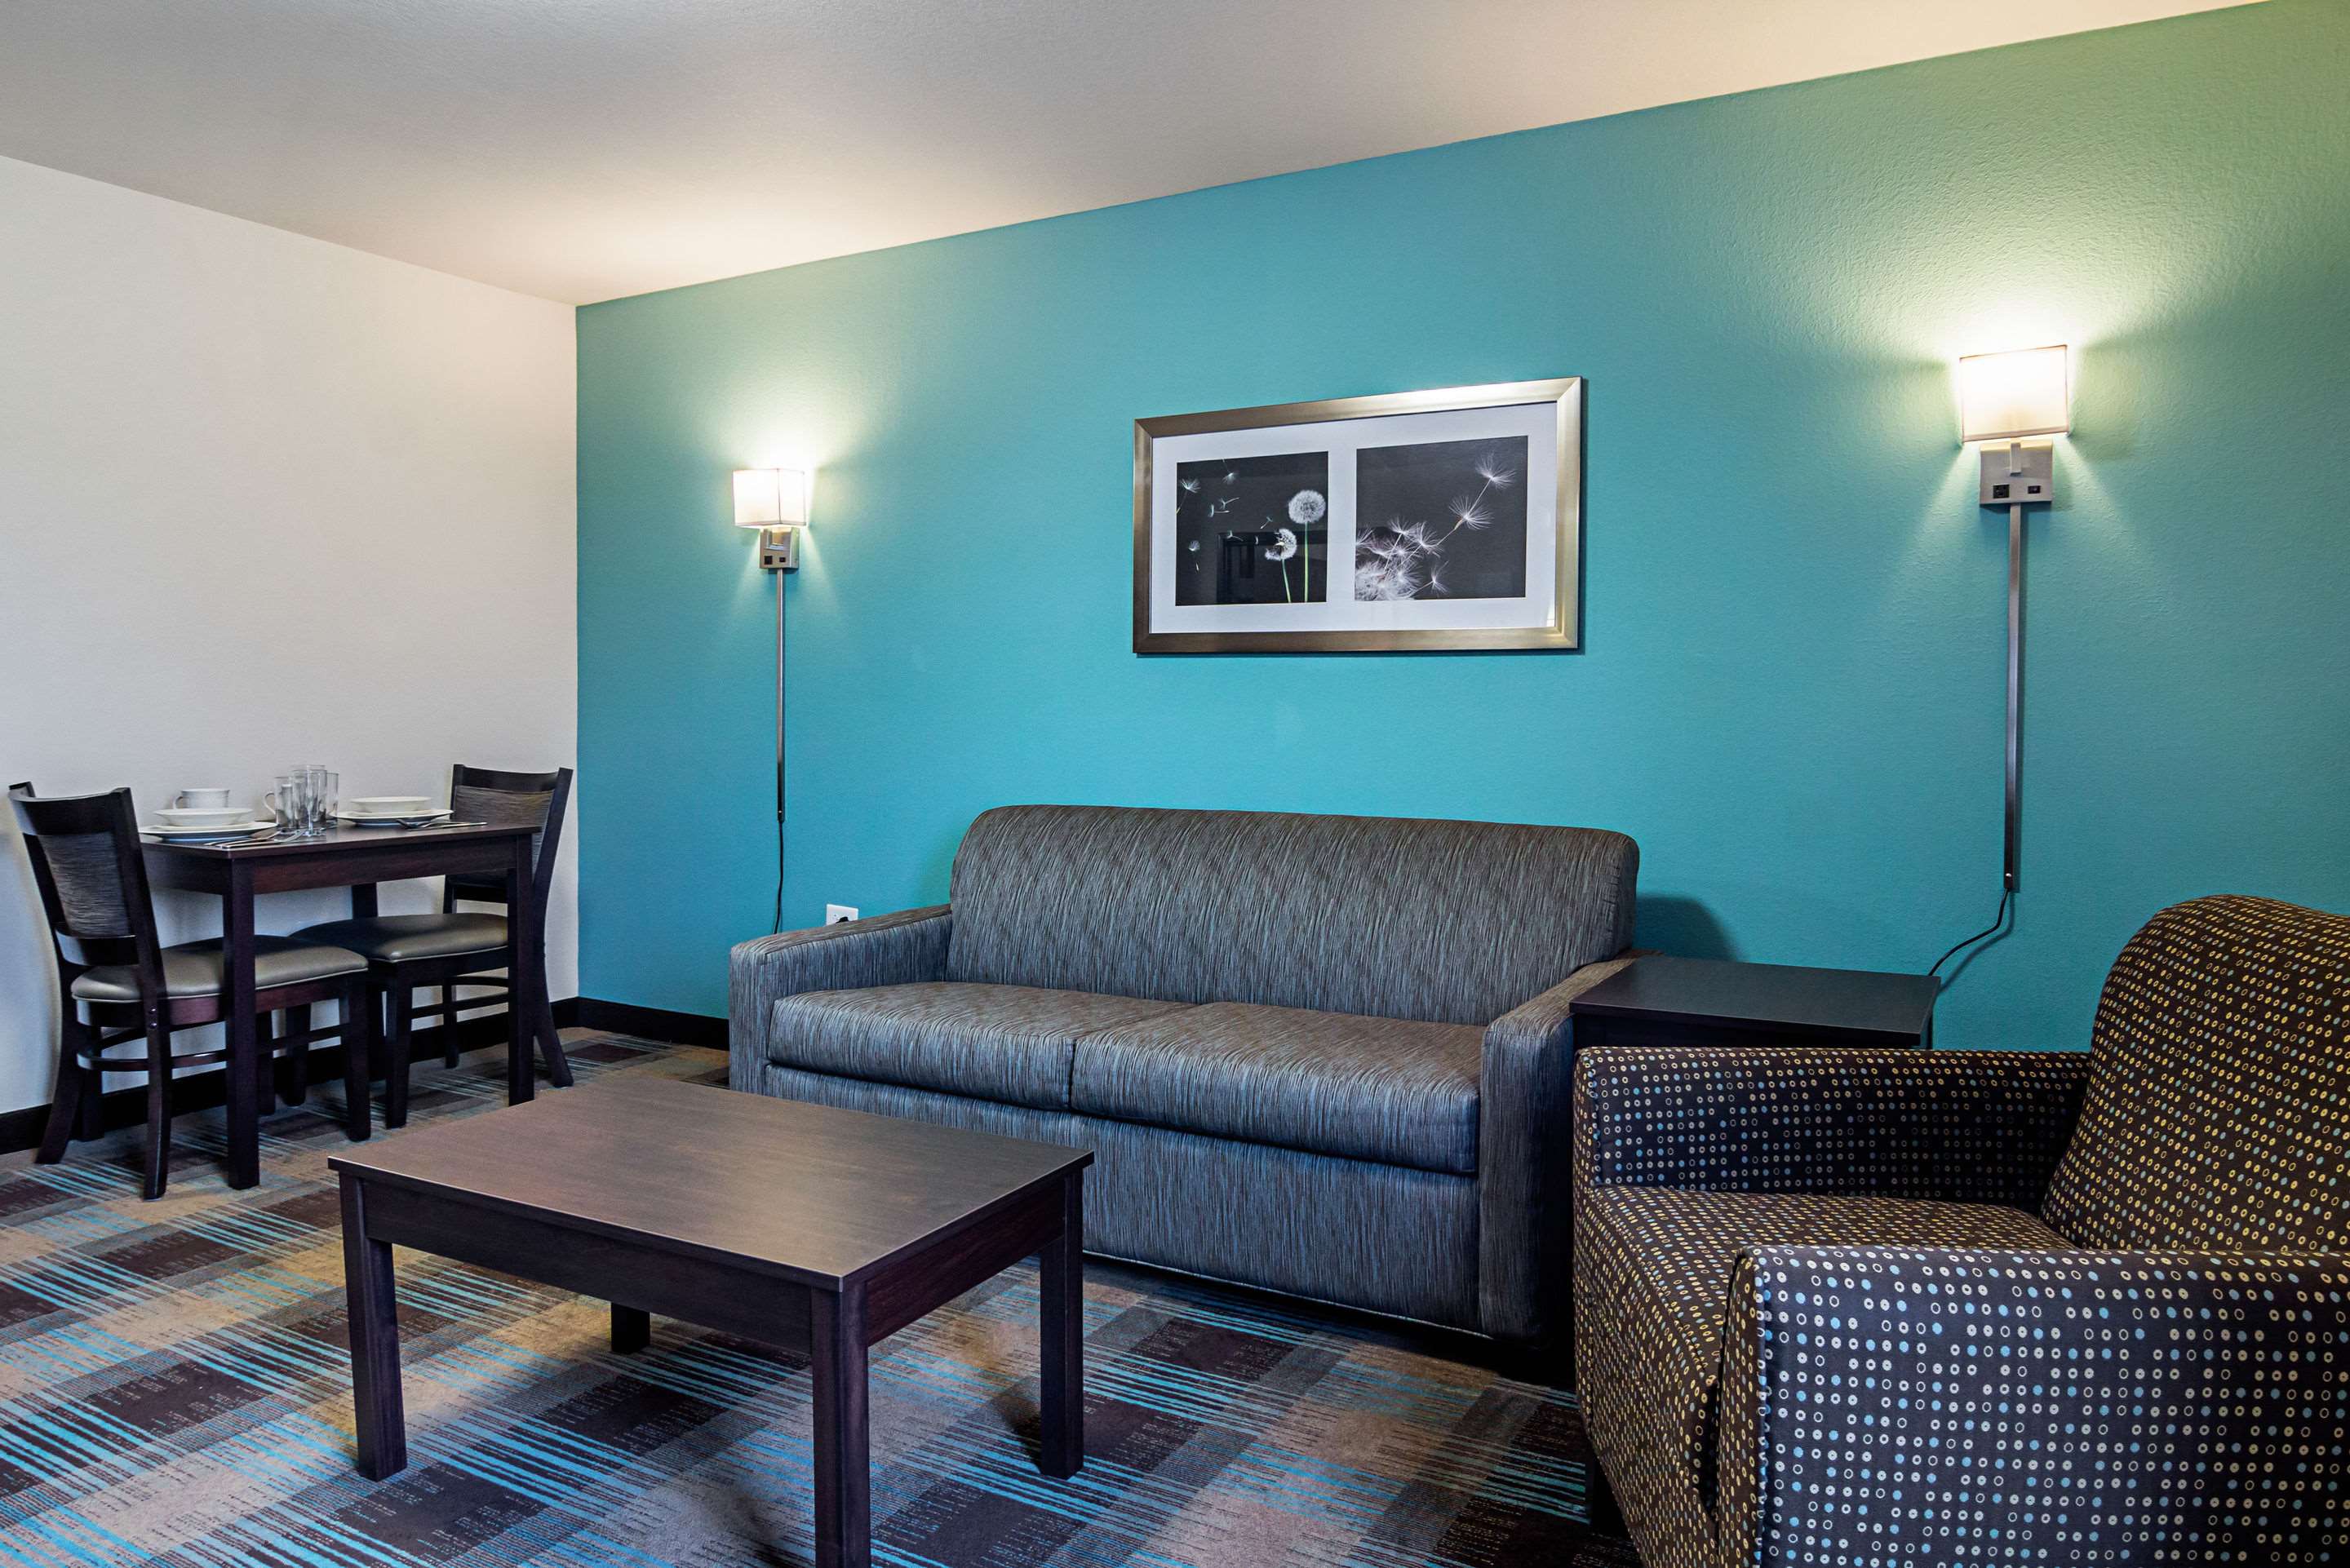 Suburban Extended Stay Hotel Photo